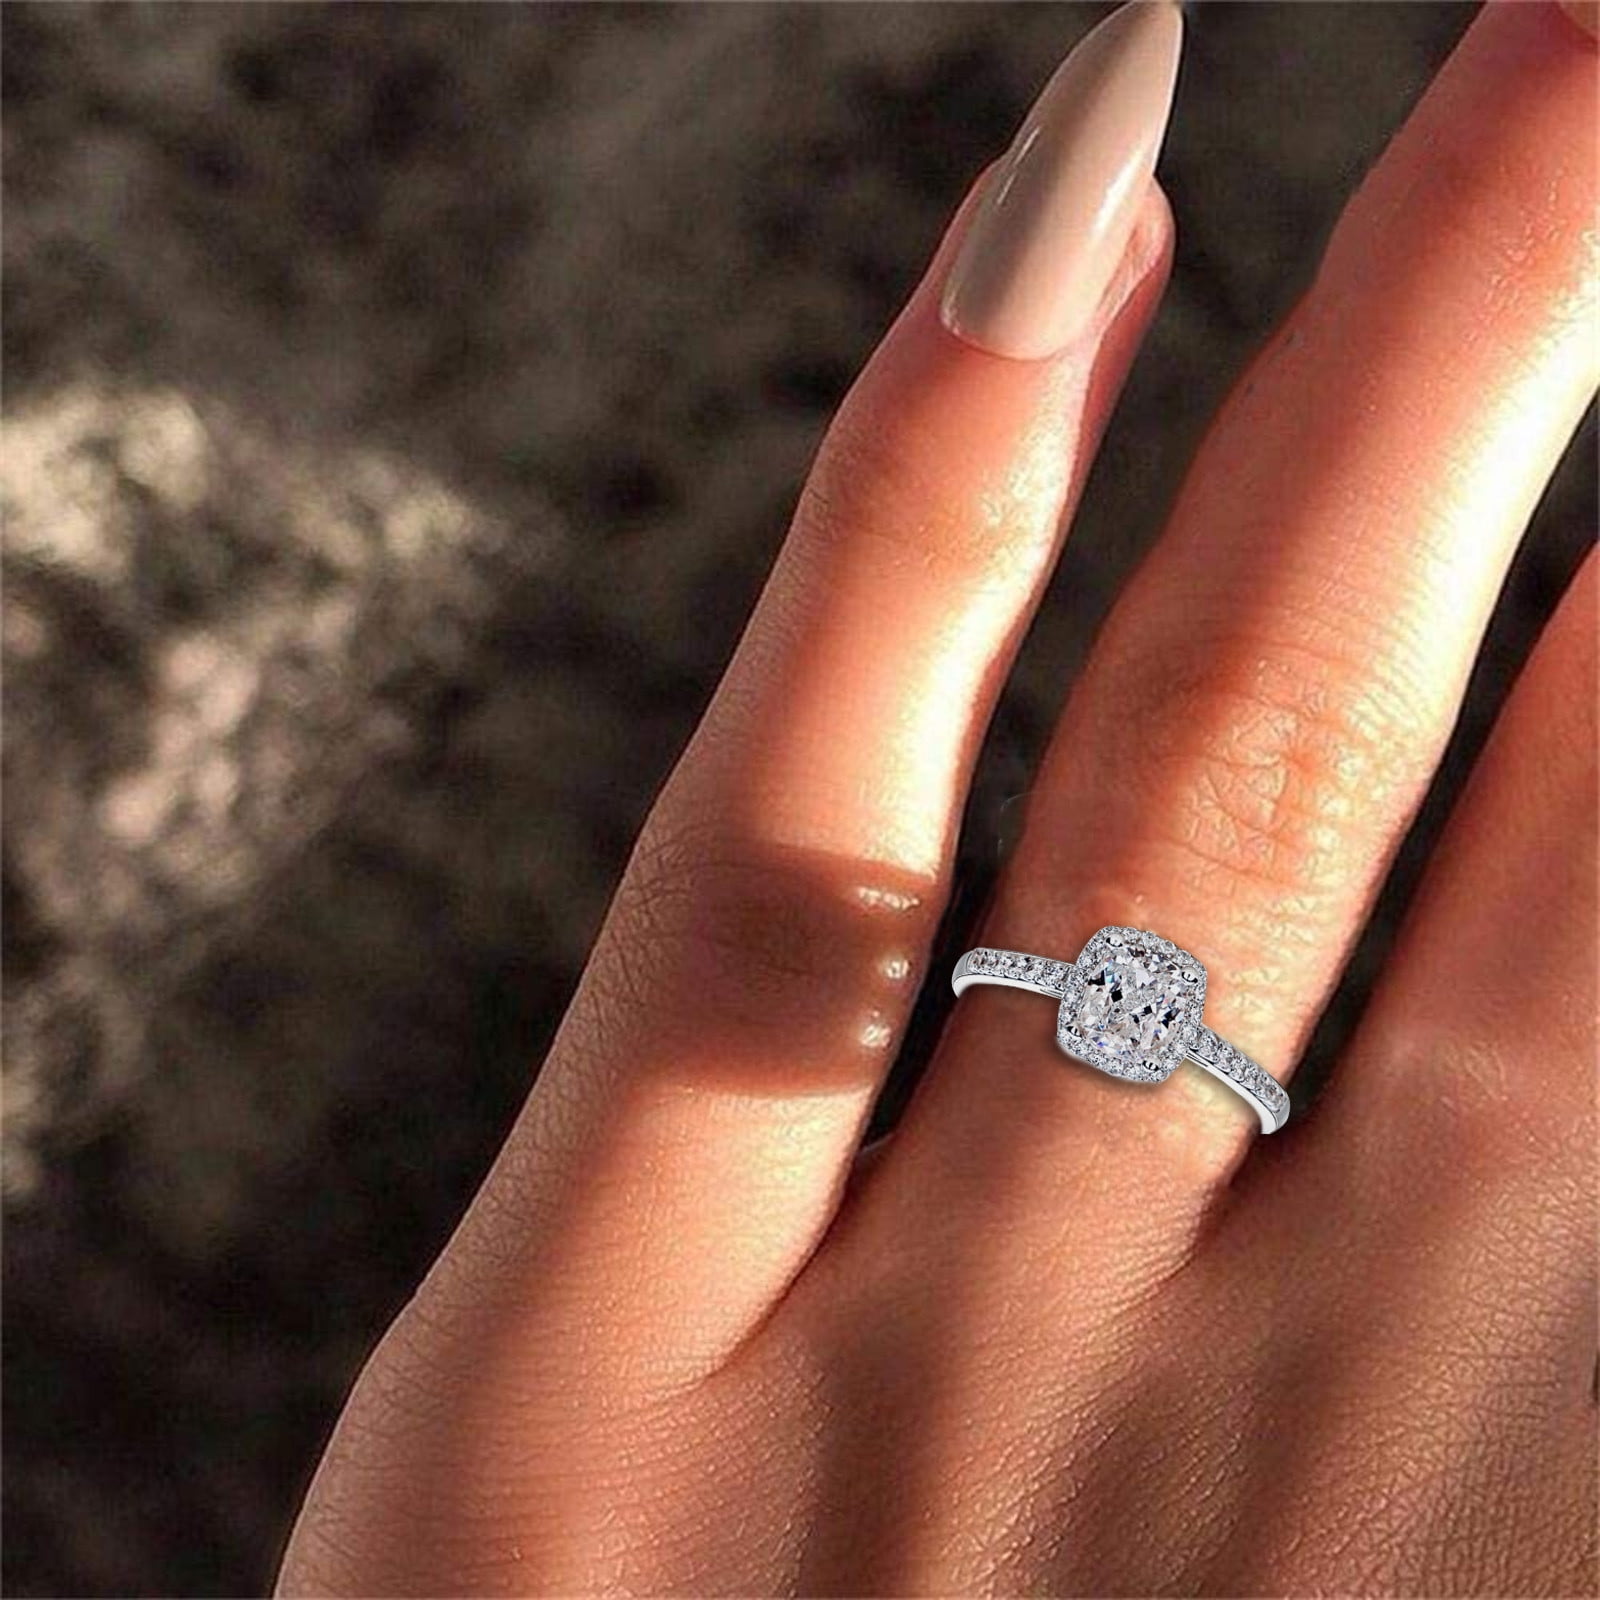 Men's Stainless Steel Cubic Zirconia Diamond Ring, Simulated Diamond Pinky  Ring, Wedding Anniversary Gift, Lab Created Eco Friendly Diamonds - Etsy |  Mens stainless steel rings, Rings for men, Stainless steel rings